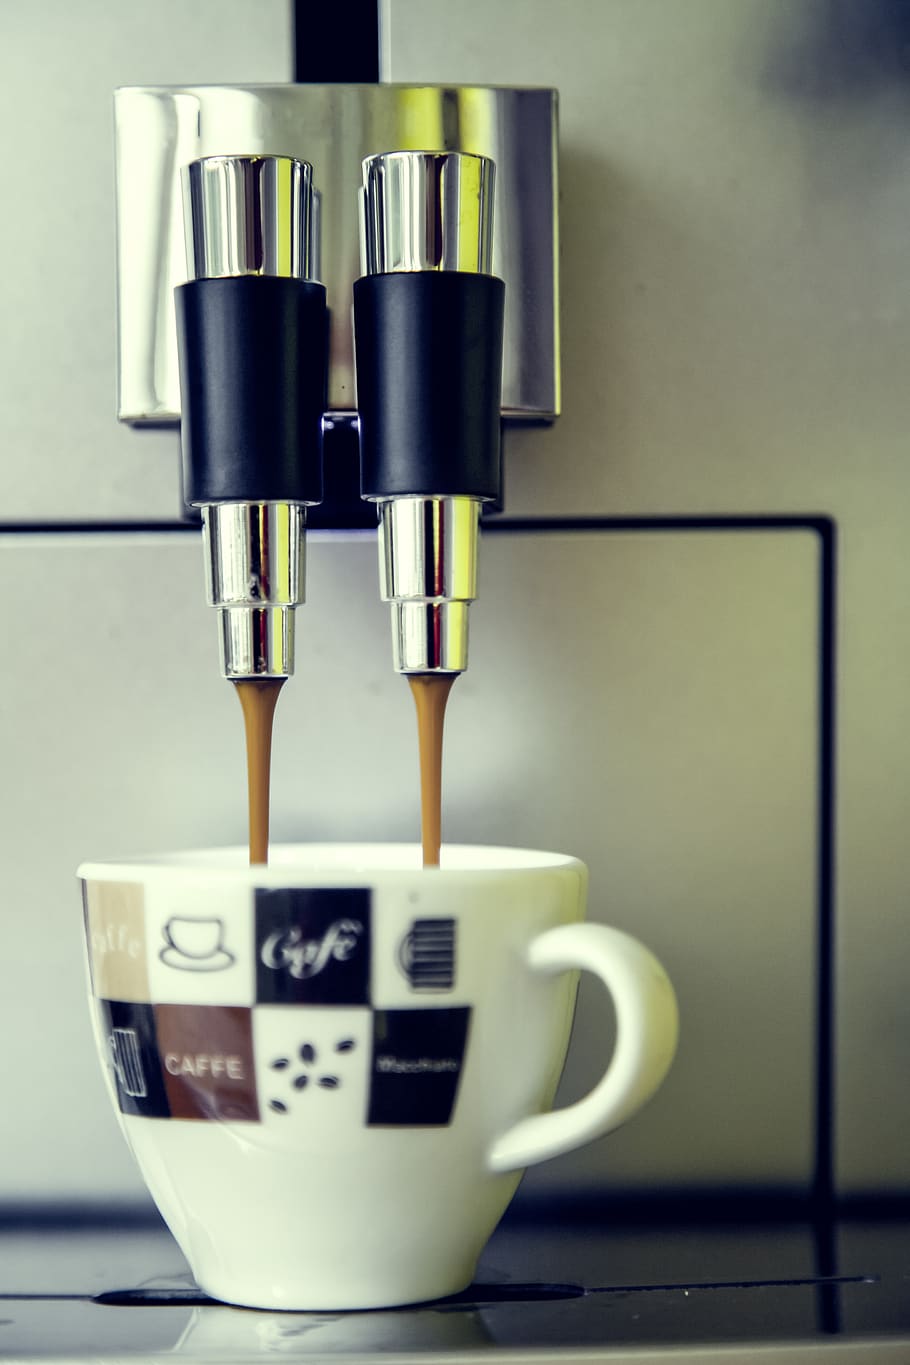 espresso, machine, coffee, drink, white, cup, hand, cafe, steel, metal